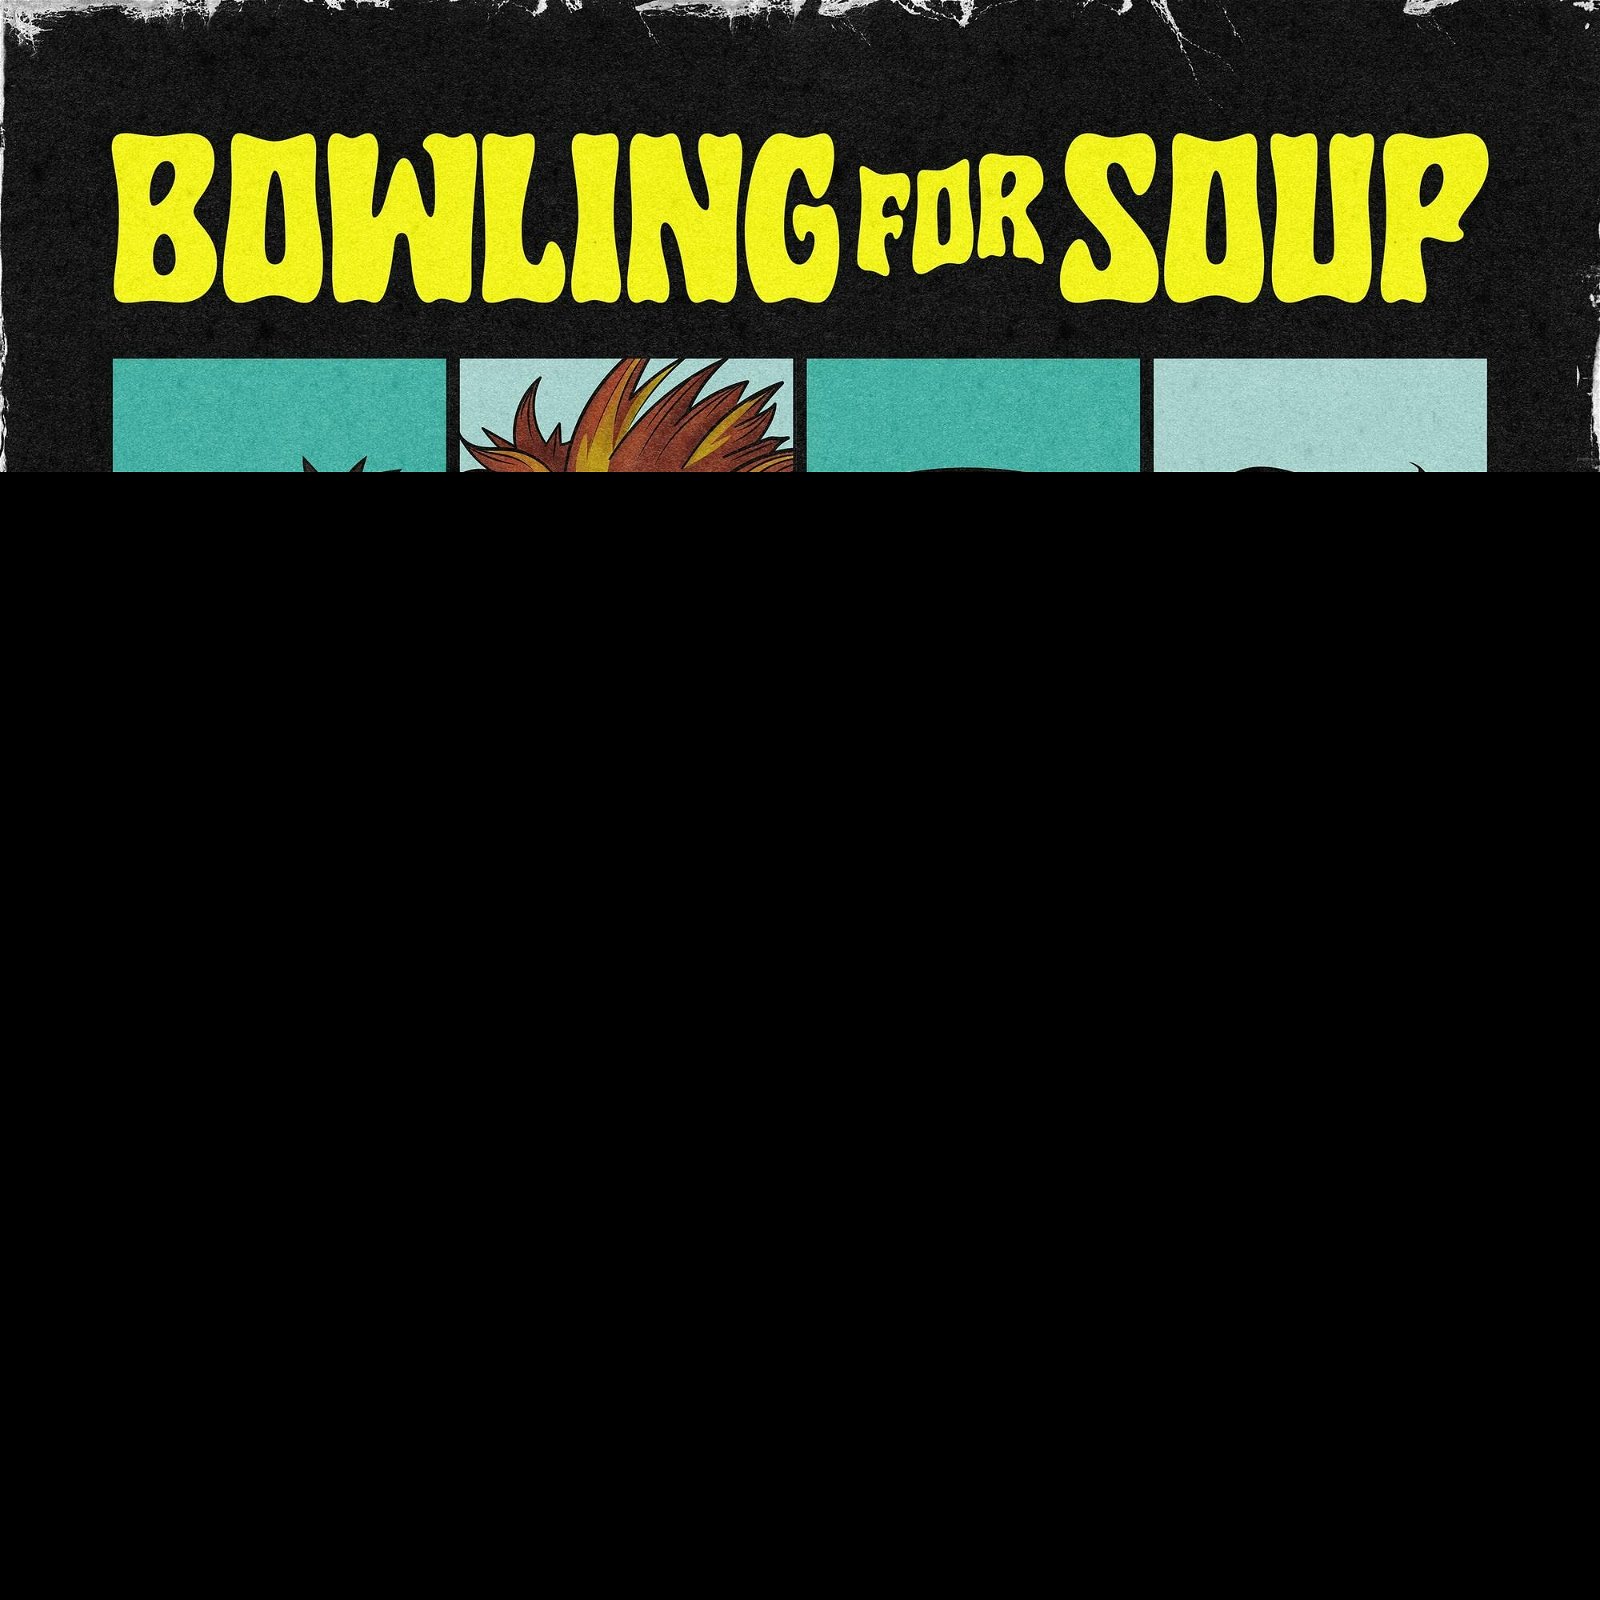 BOWLING FOR SOUP - POP DRUNK SNOT BREAD, CD